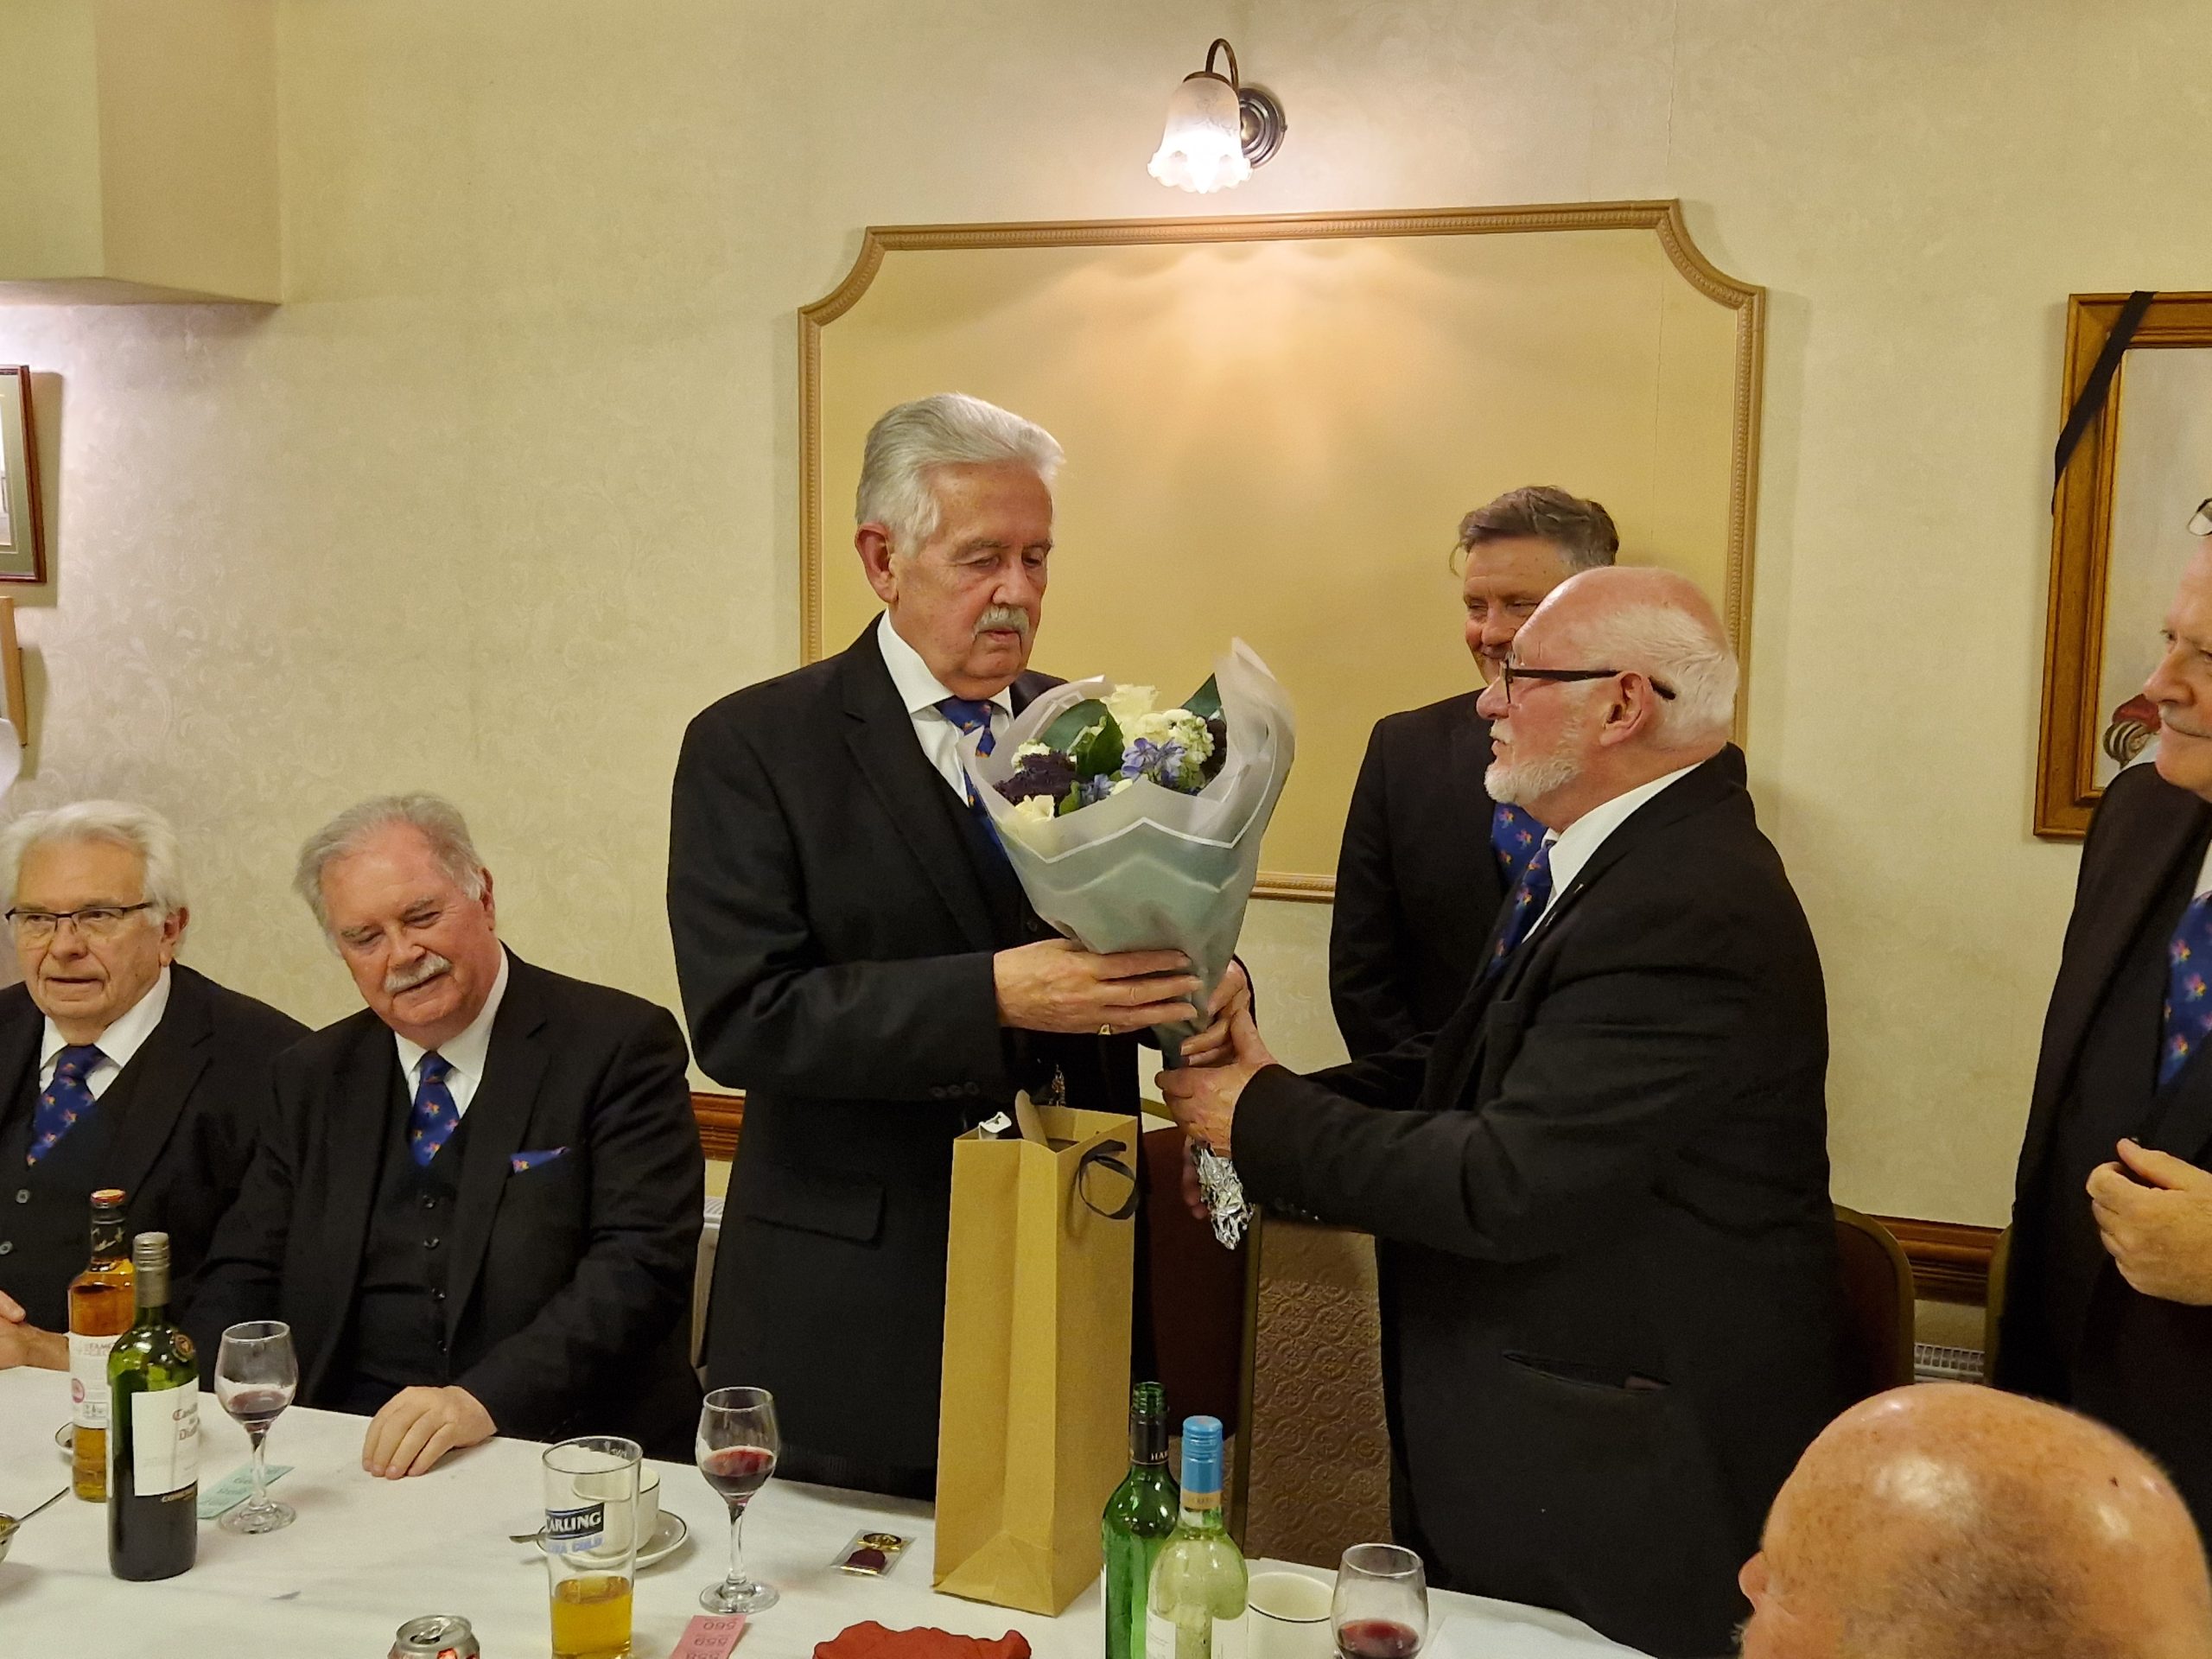 Castle Chapter No. 1436 centenary warrant MEGS presented with flowers